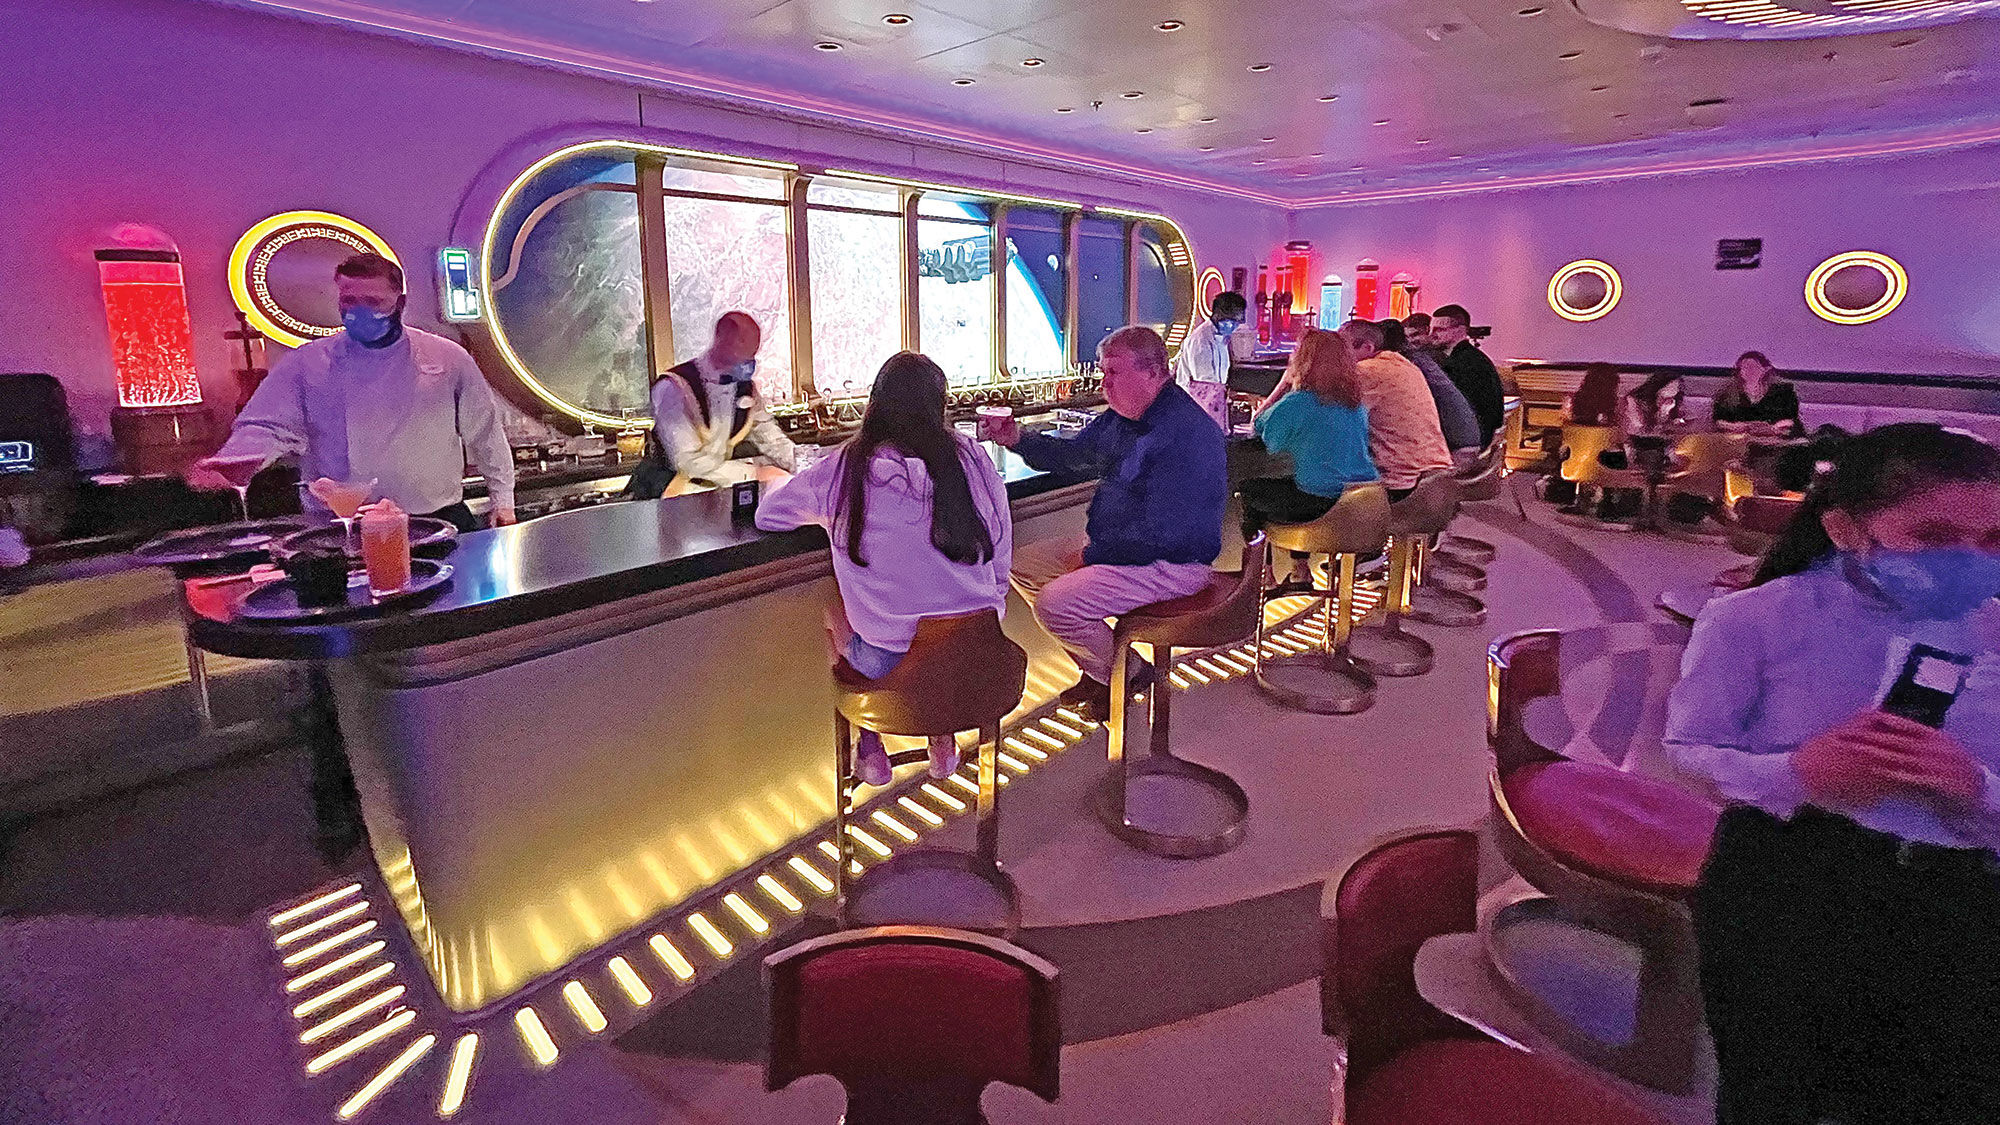 The adults-only Star Wars: Hyperspace Lounge has a  “window” behind the bar that offers views of planets and ships from the Star Wars universe.